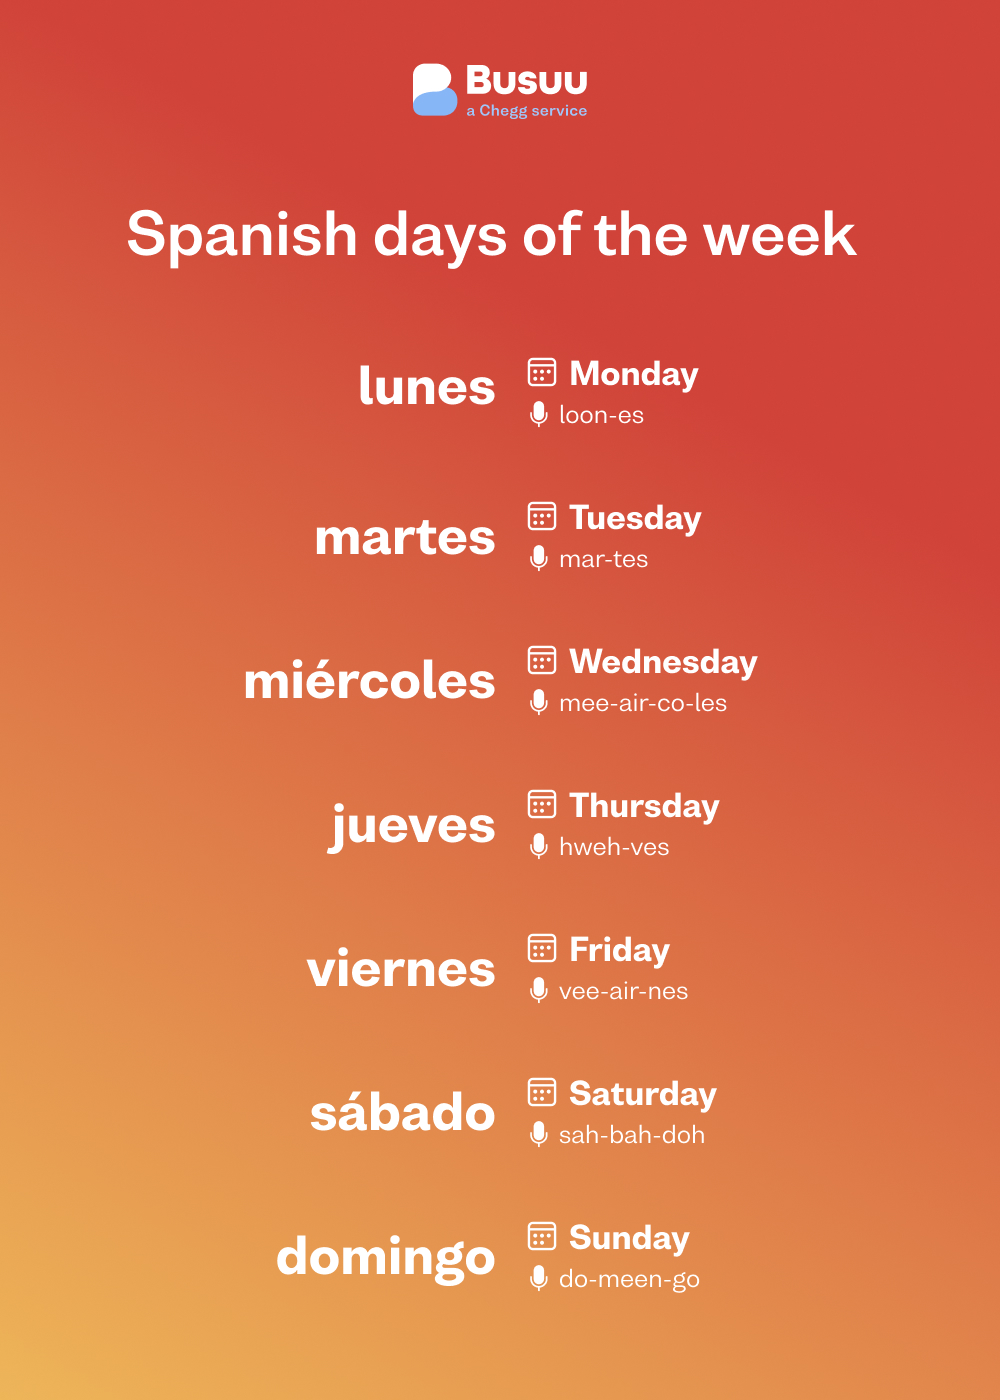 Spanish days of the week chart, courtesy of language-learning app Busuu's Spanish days of the week guide